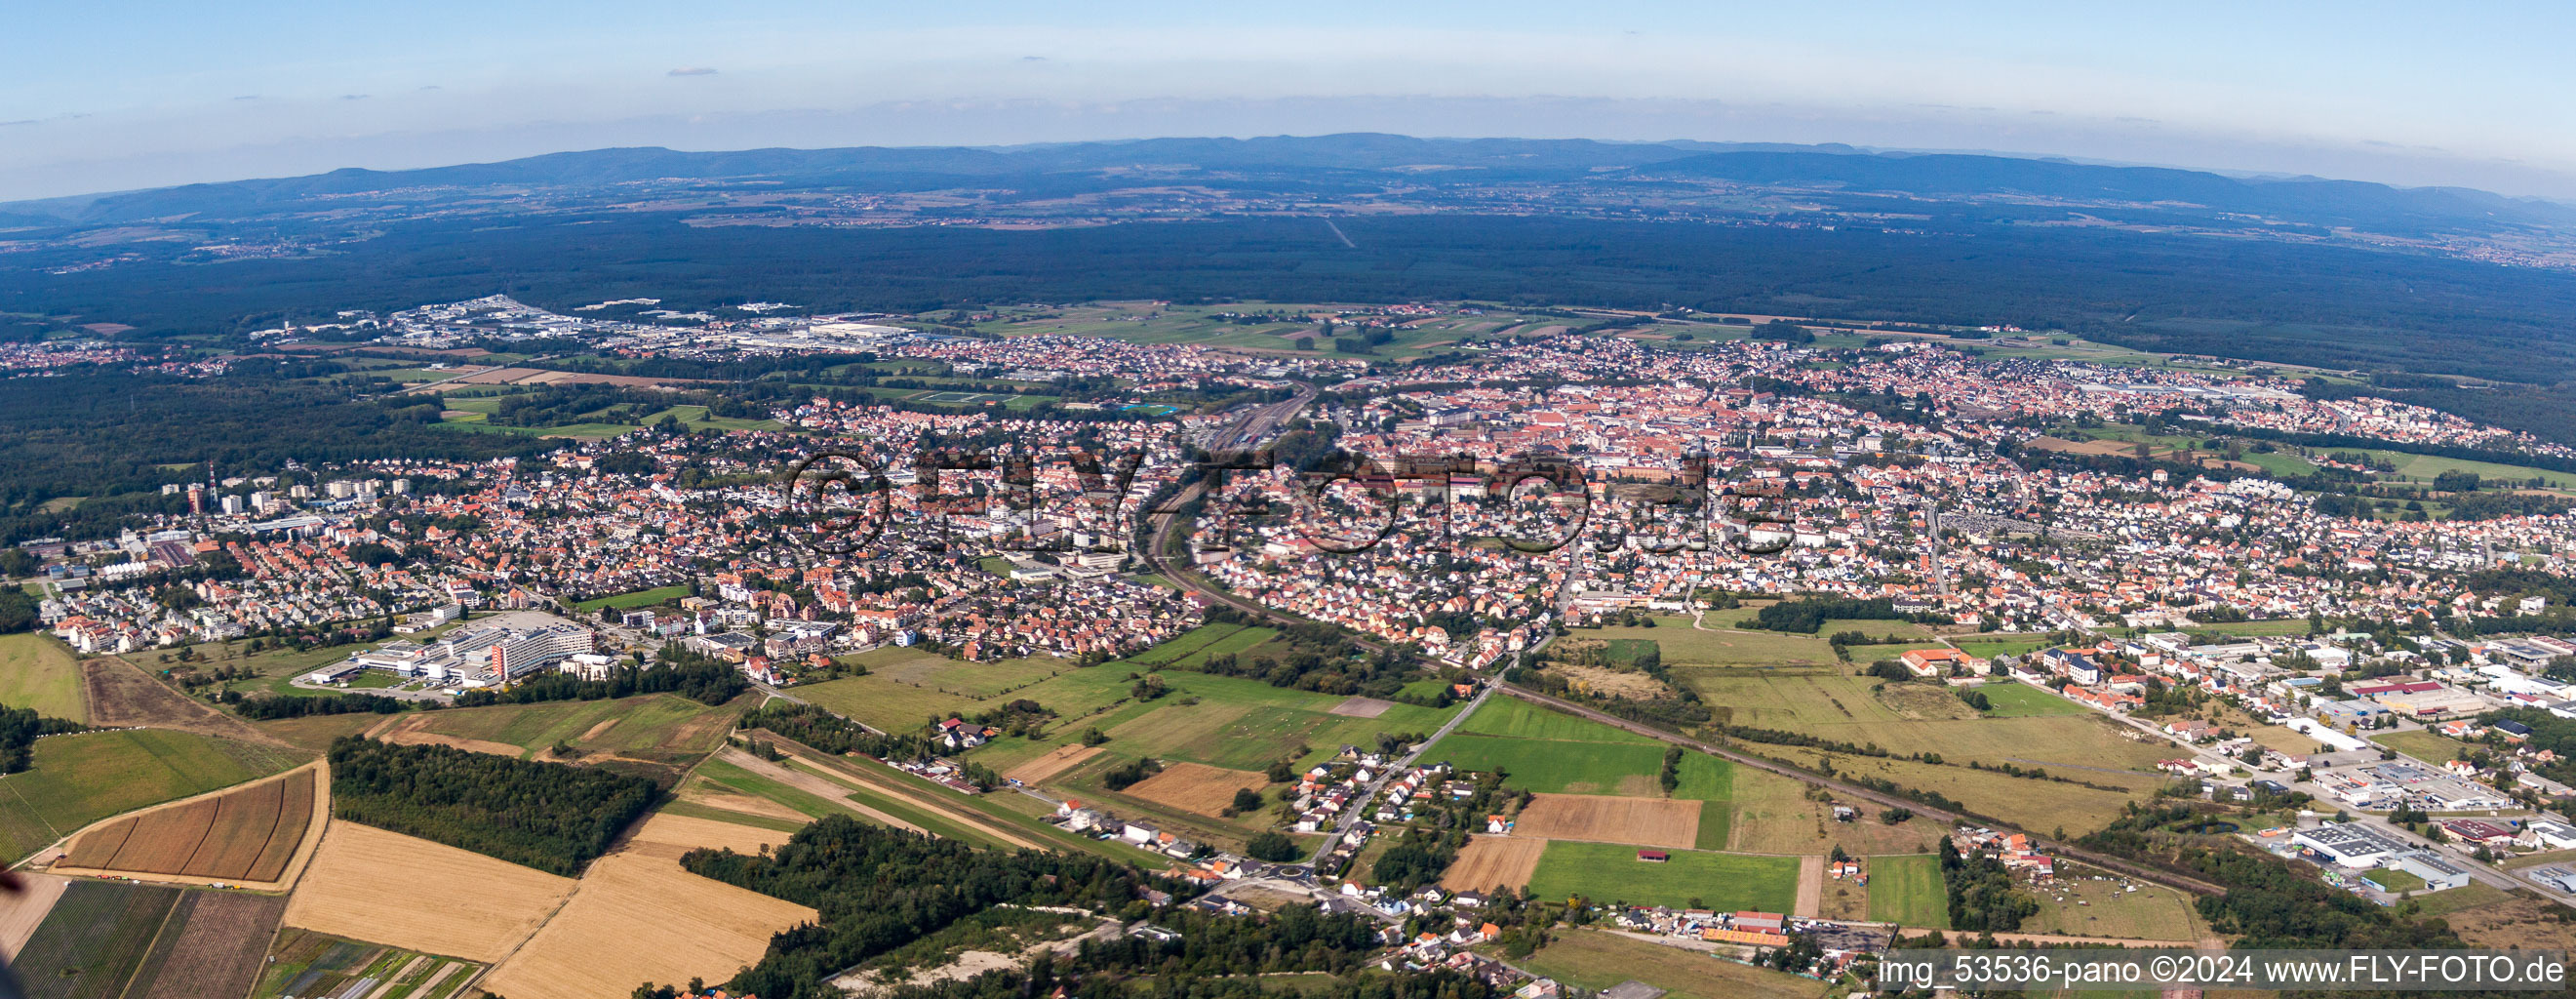 Panoramic perspective Town View of the streets and houses of the residential areas in Haguenau in Grand Est, France